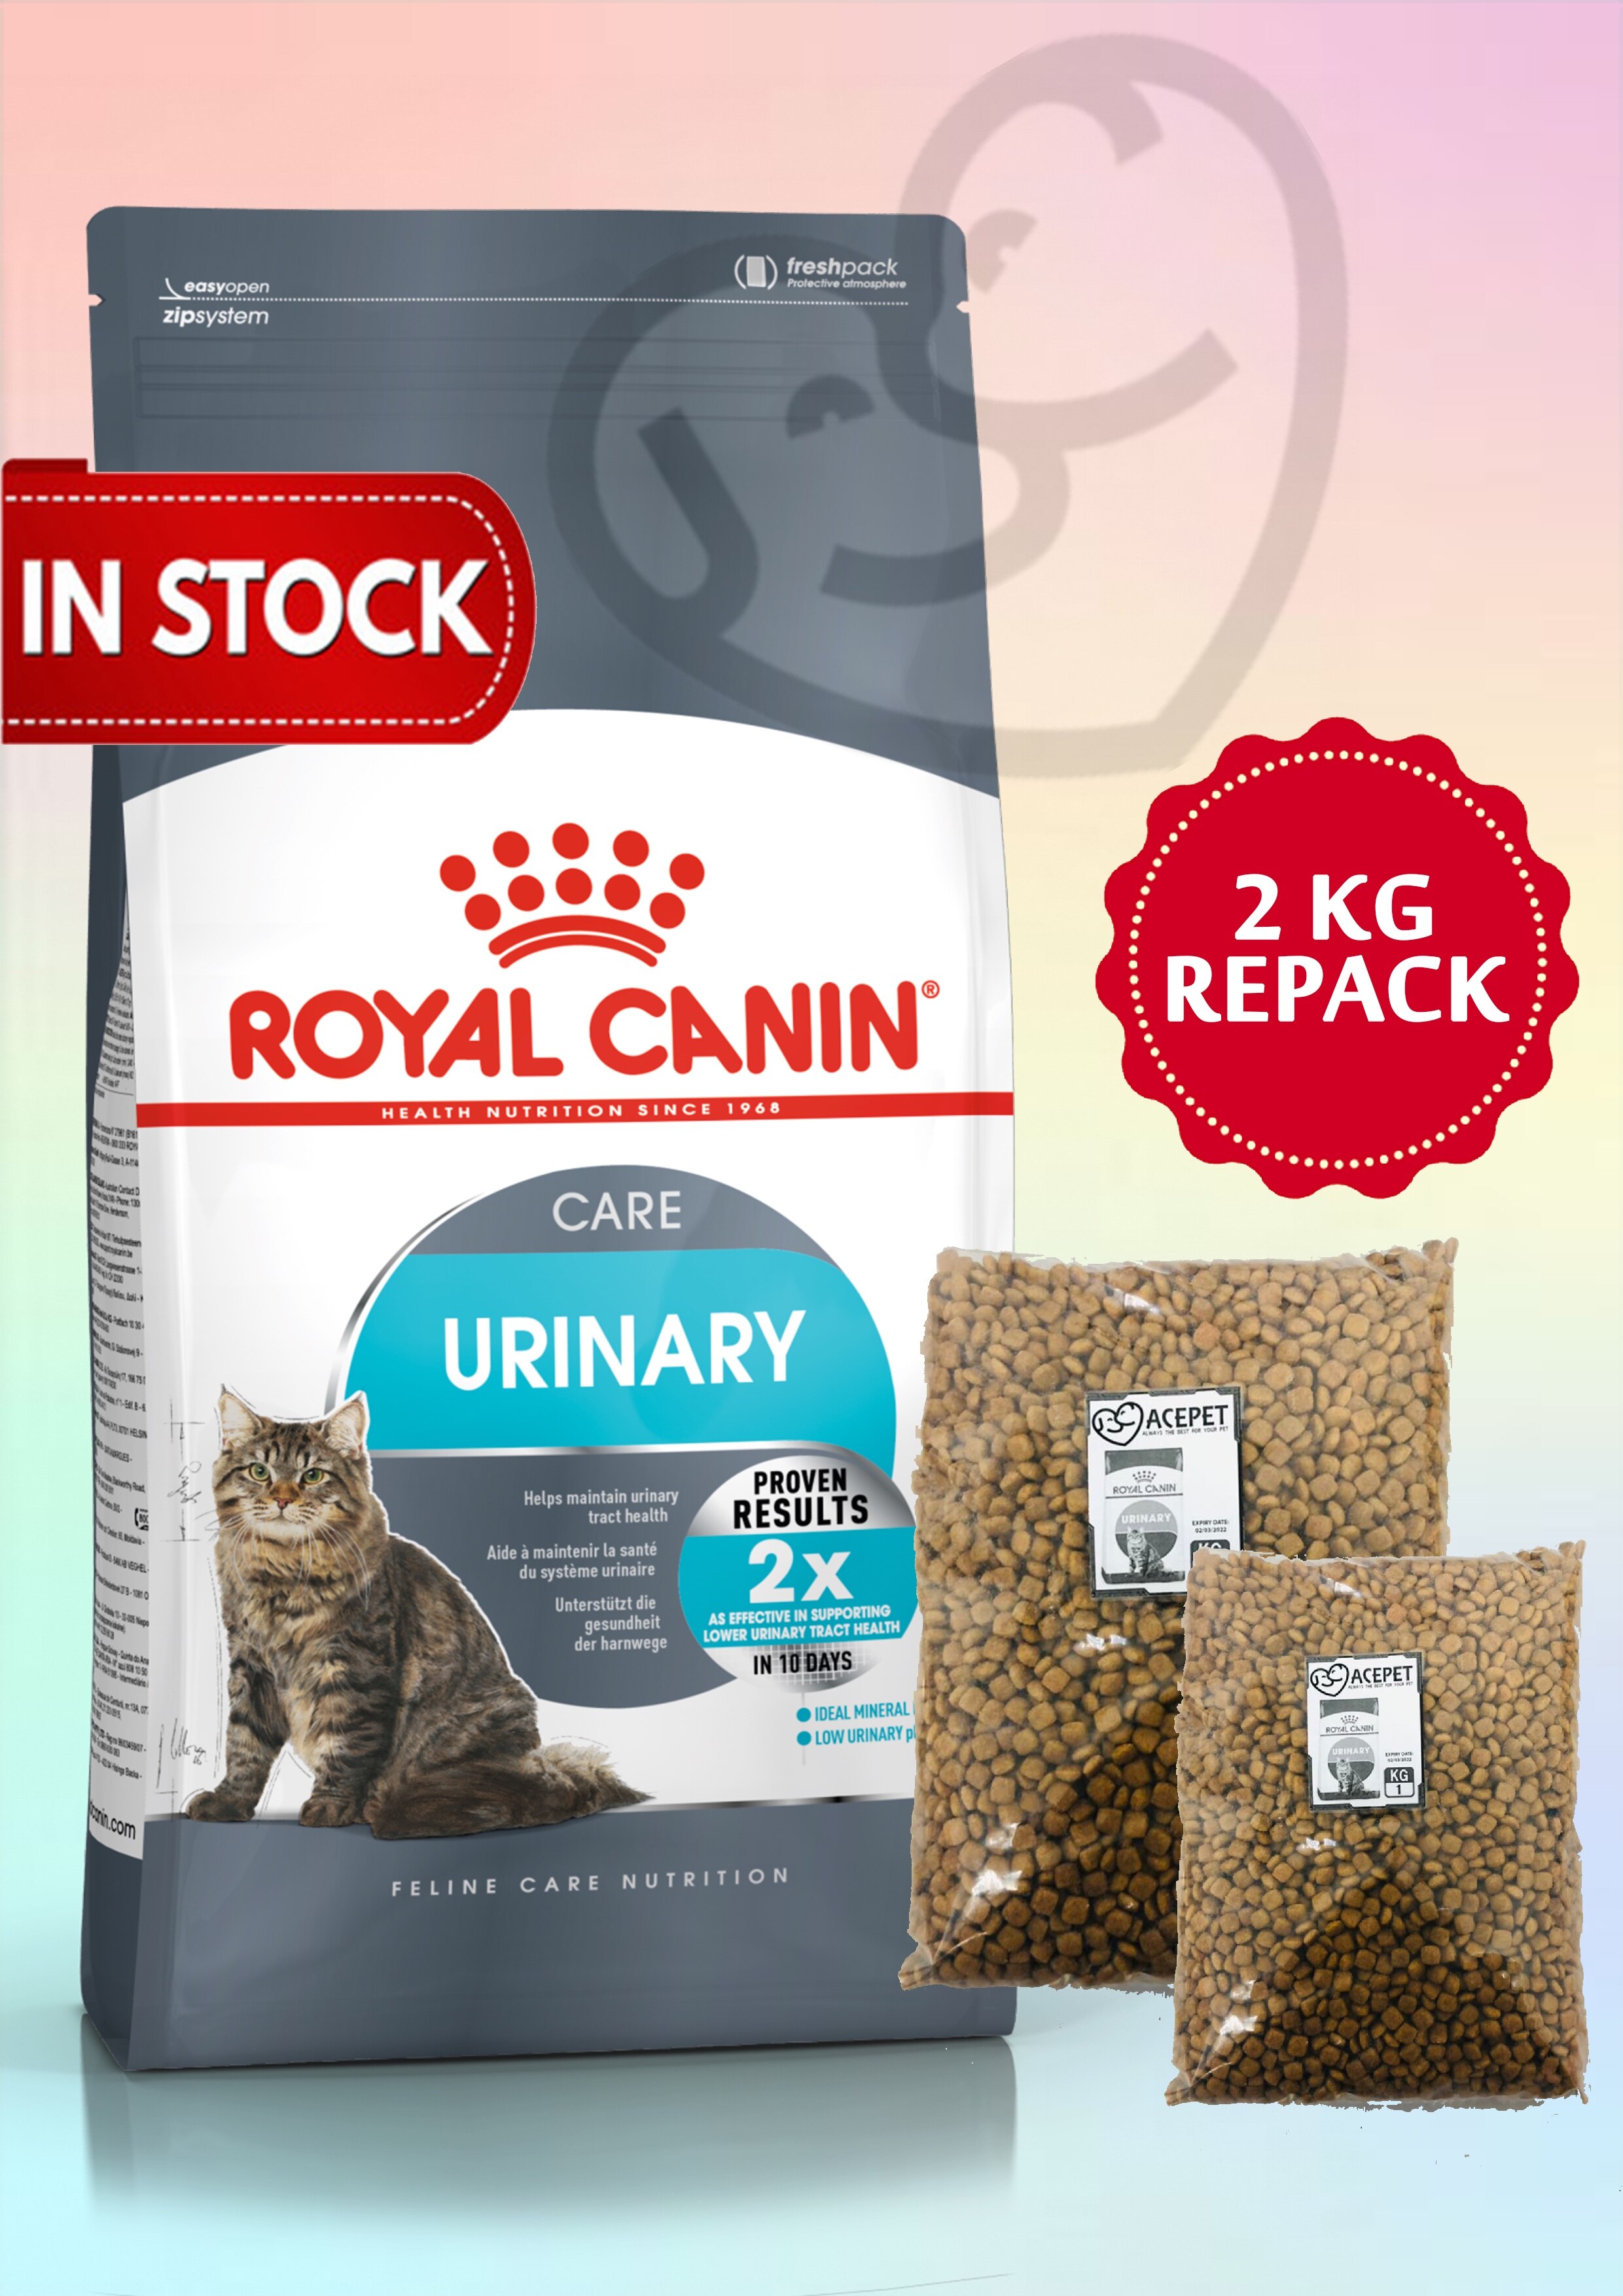 REPACK Royal Canin Urinary Care Adult Cat Dry Food 2KG REPACK royal canin urinary repack urinary cat food urinary repack cat food makanan kucing royal canin urinary repack premium cat food masalah kencing cat difficult urine